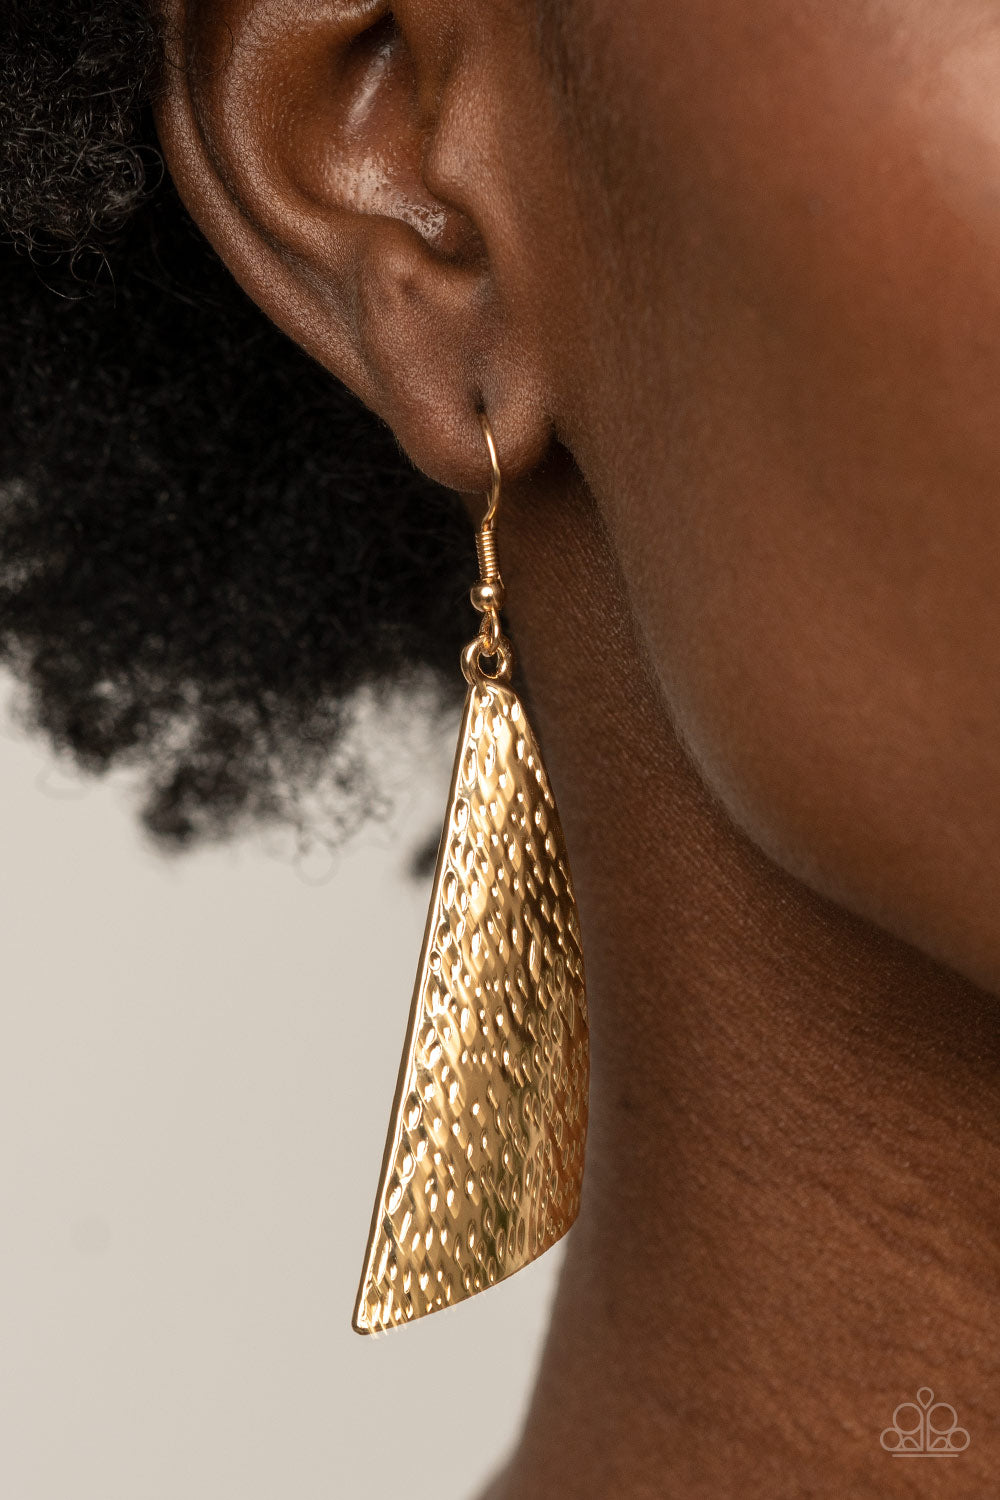 Ready The Troops - Gold Earrings - Princess Glam Shop